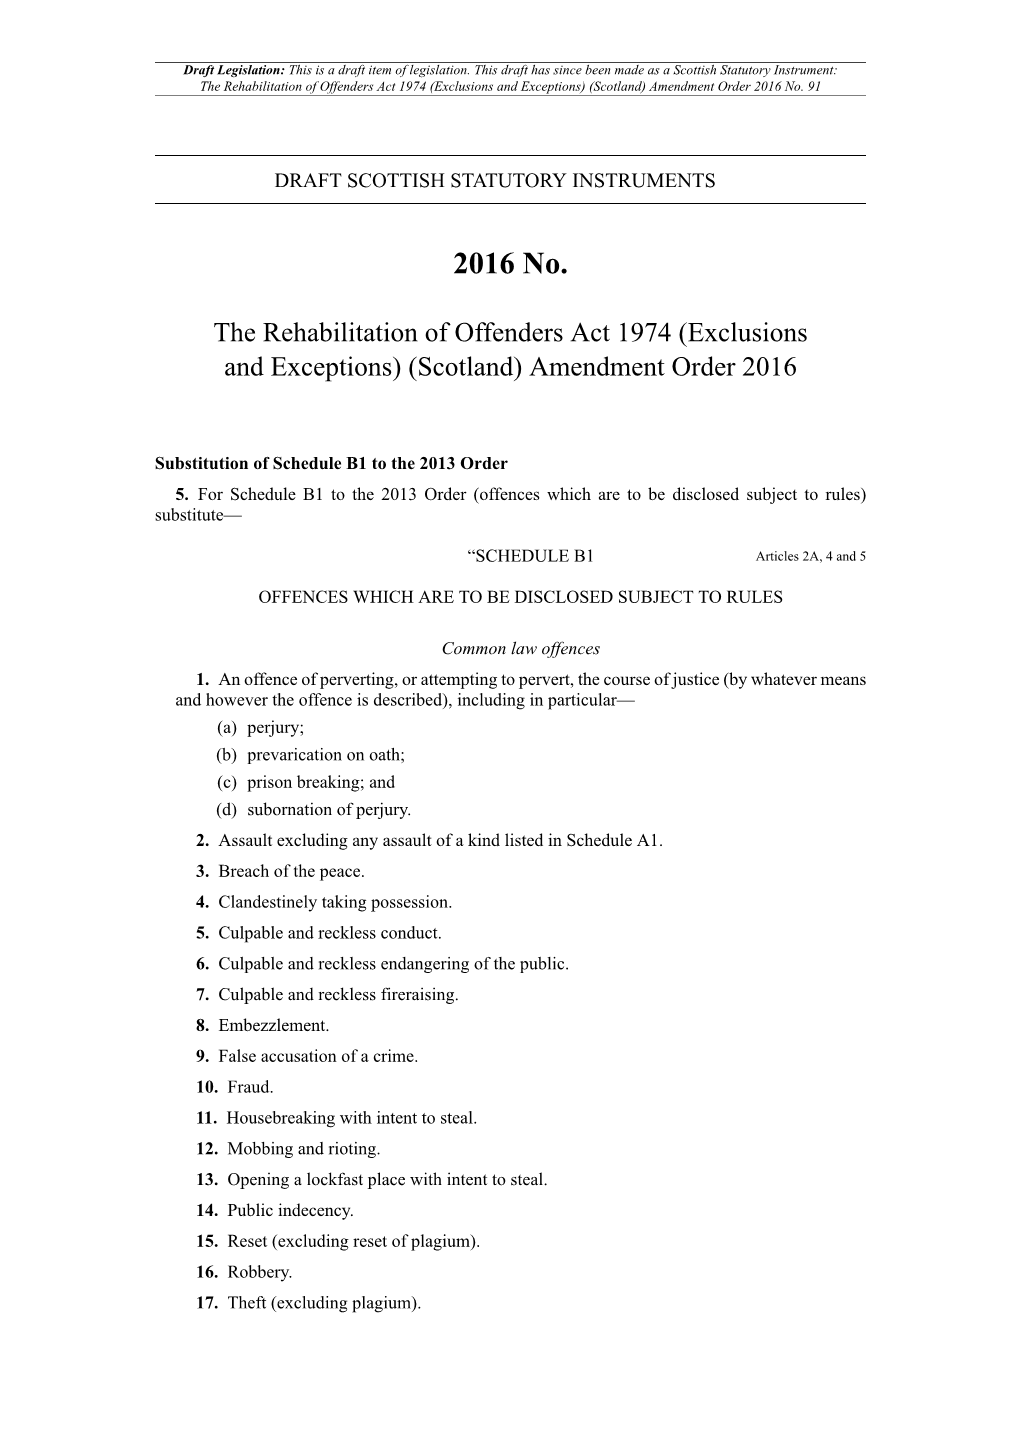 The Rehabilitation of Offenders Act 1974 (Exclusions and Exceptions) (Scotland) Amendment Order 2016 No